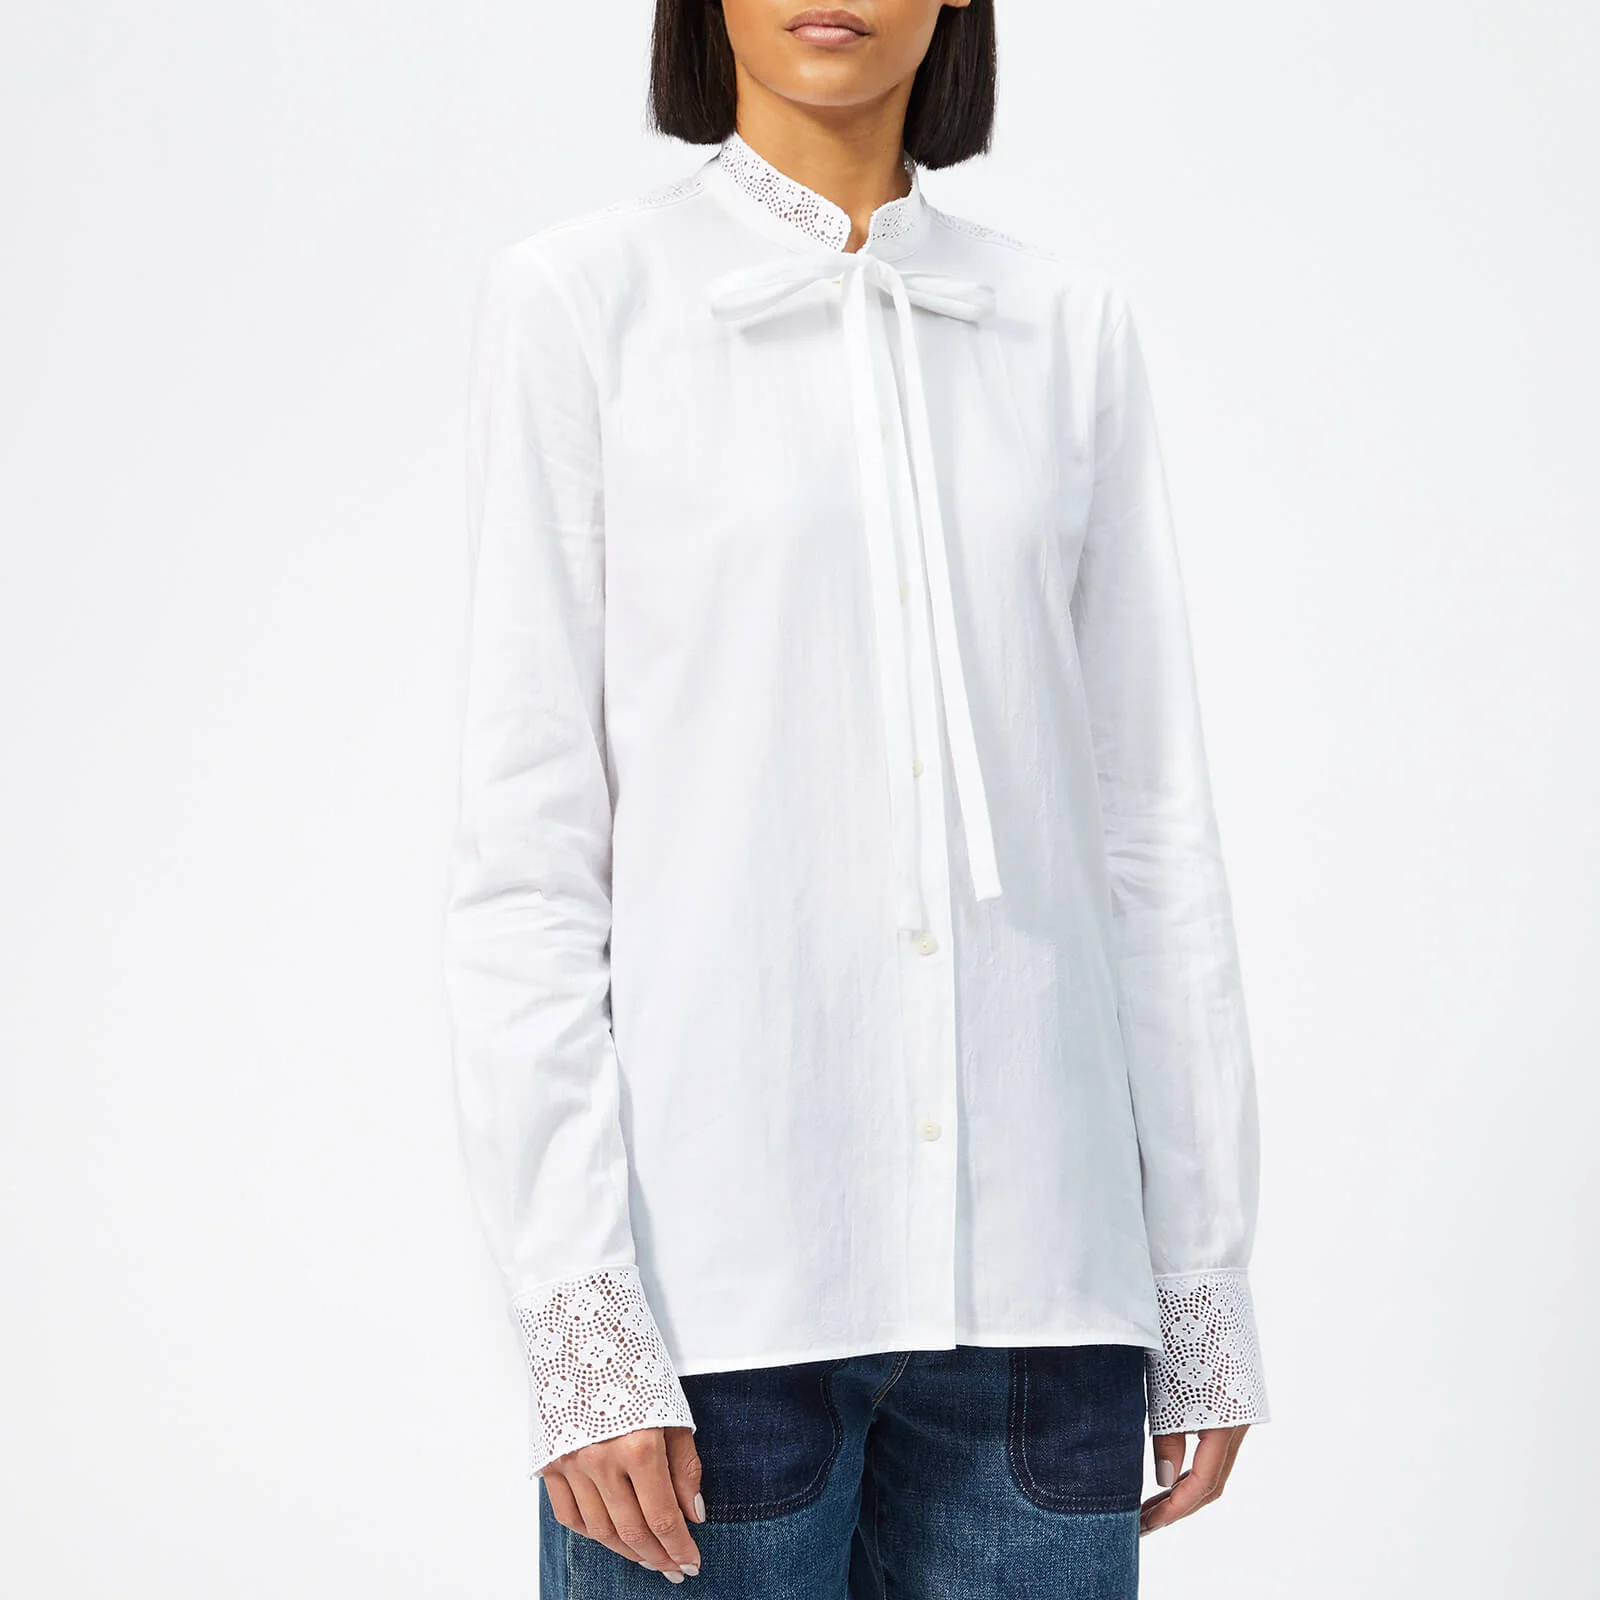 JW Anderson Women's Broderie Anglaise Blouse - White Image 1